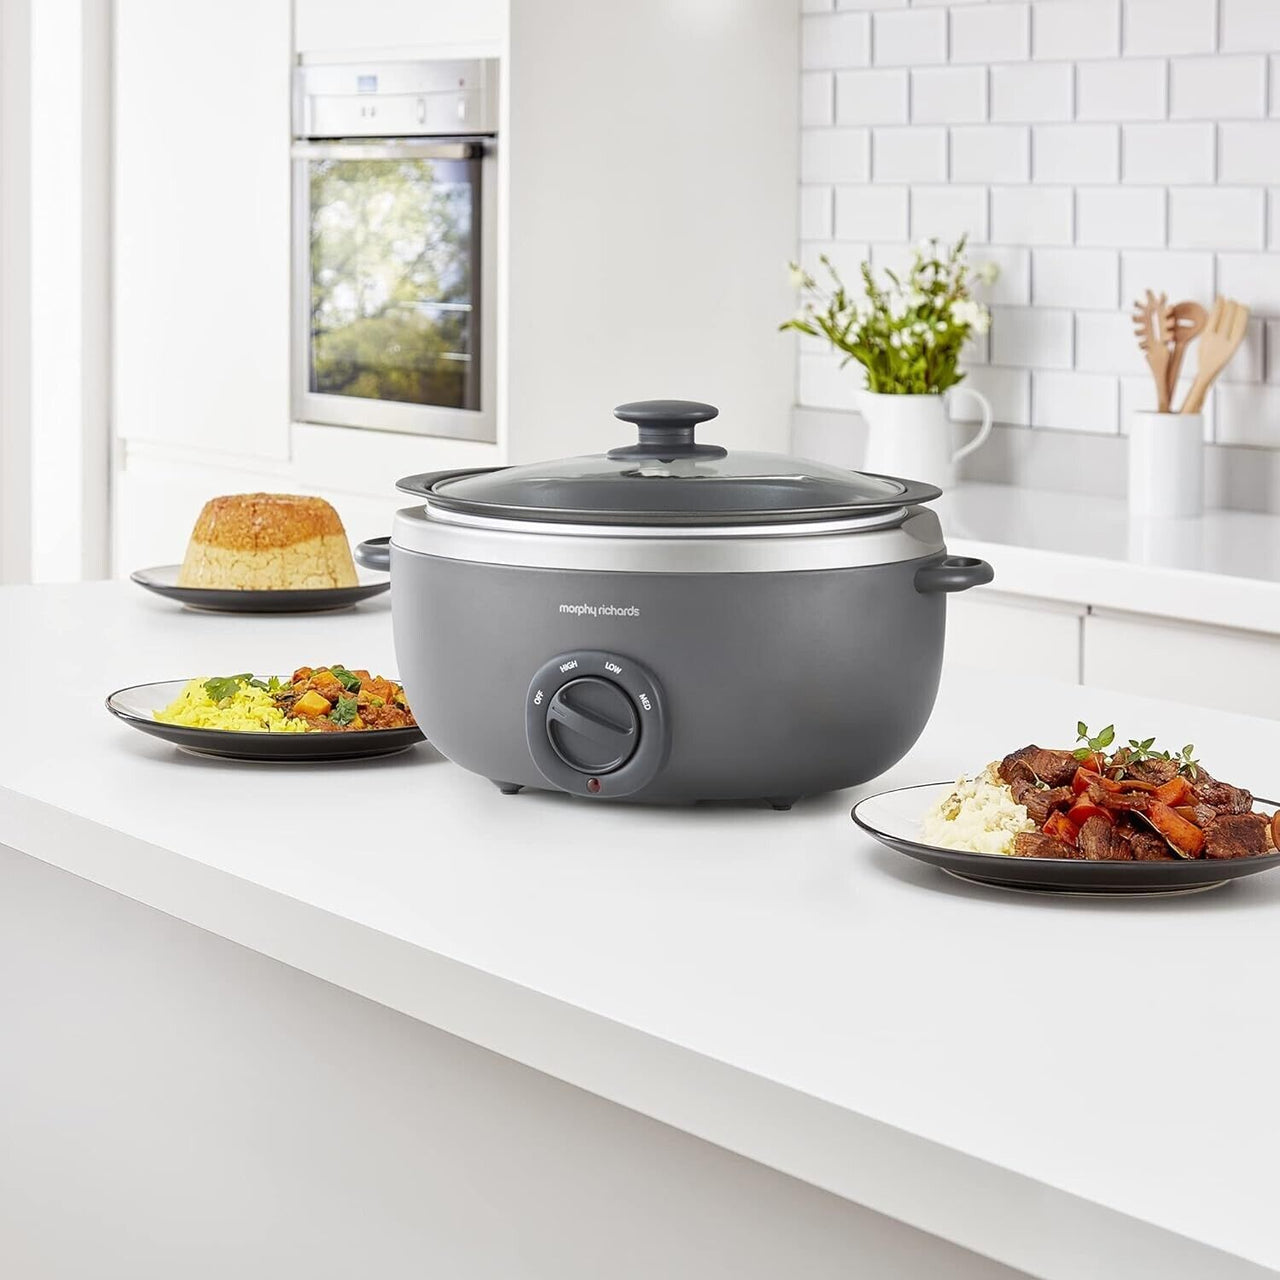 Morphy Richards Sear & Stew 6.5L Oval Slow Cooker Titanium 461022